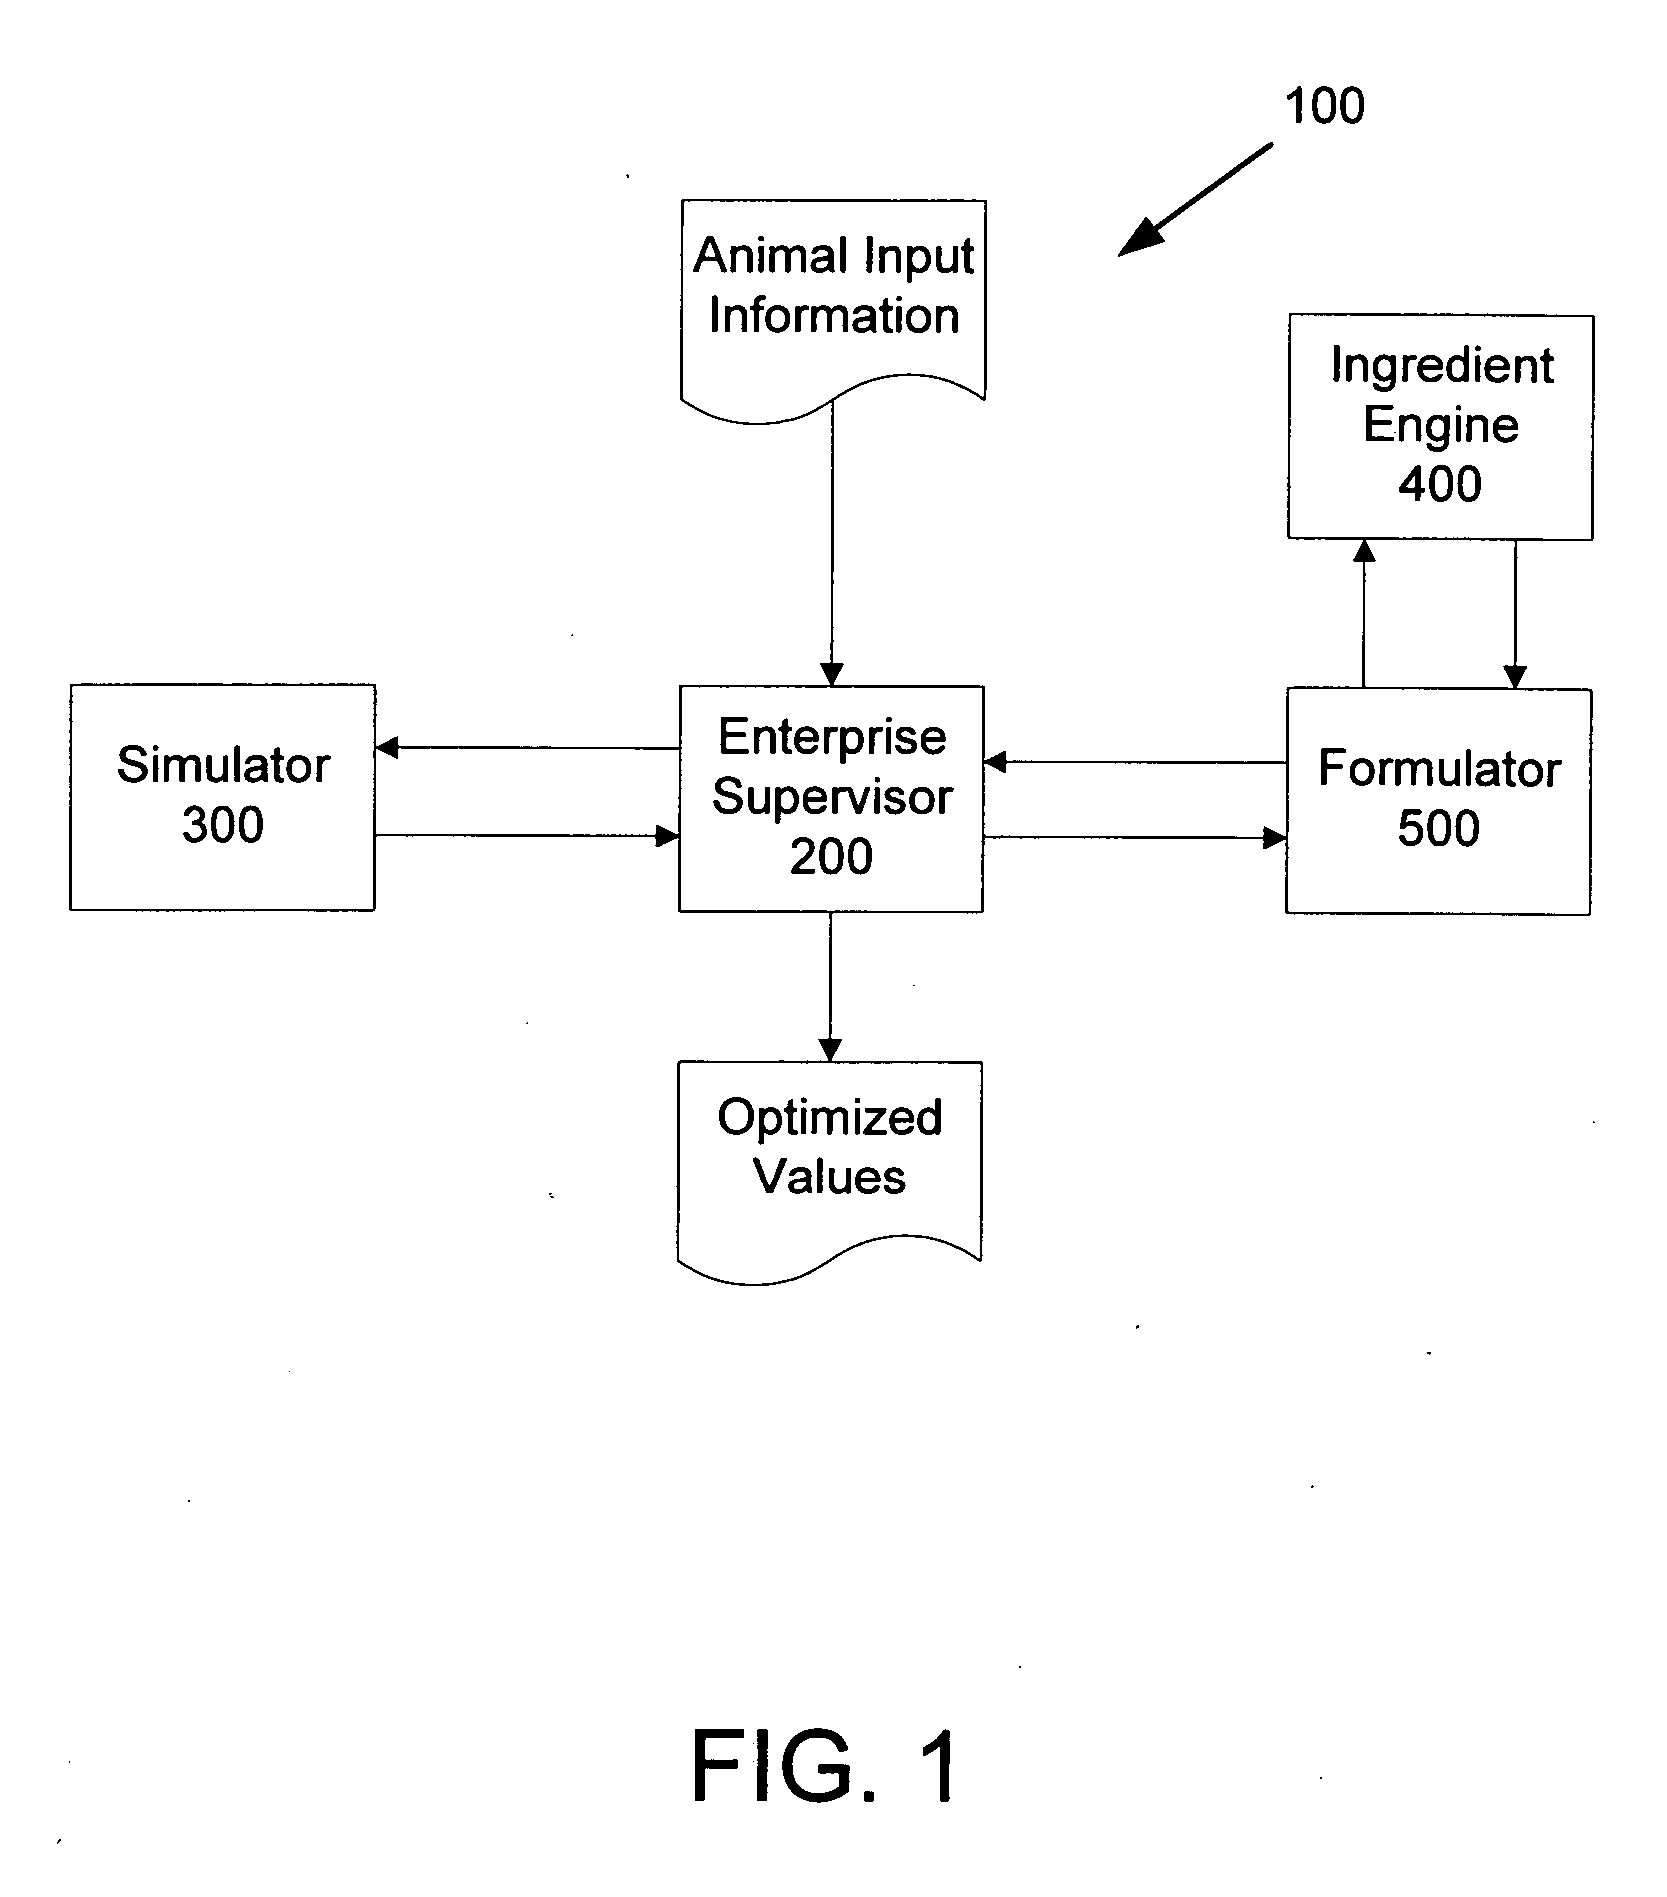 System and method for animal production optimization